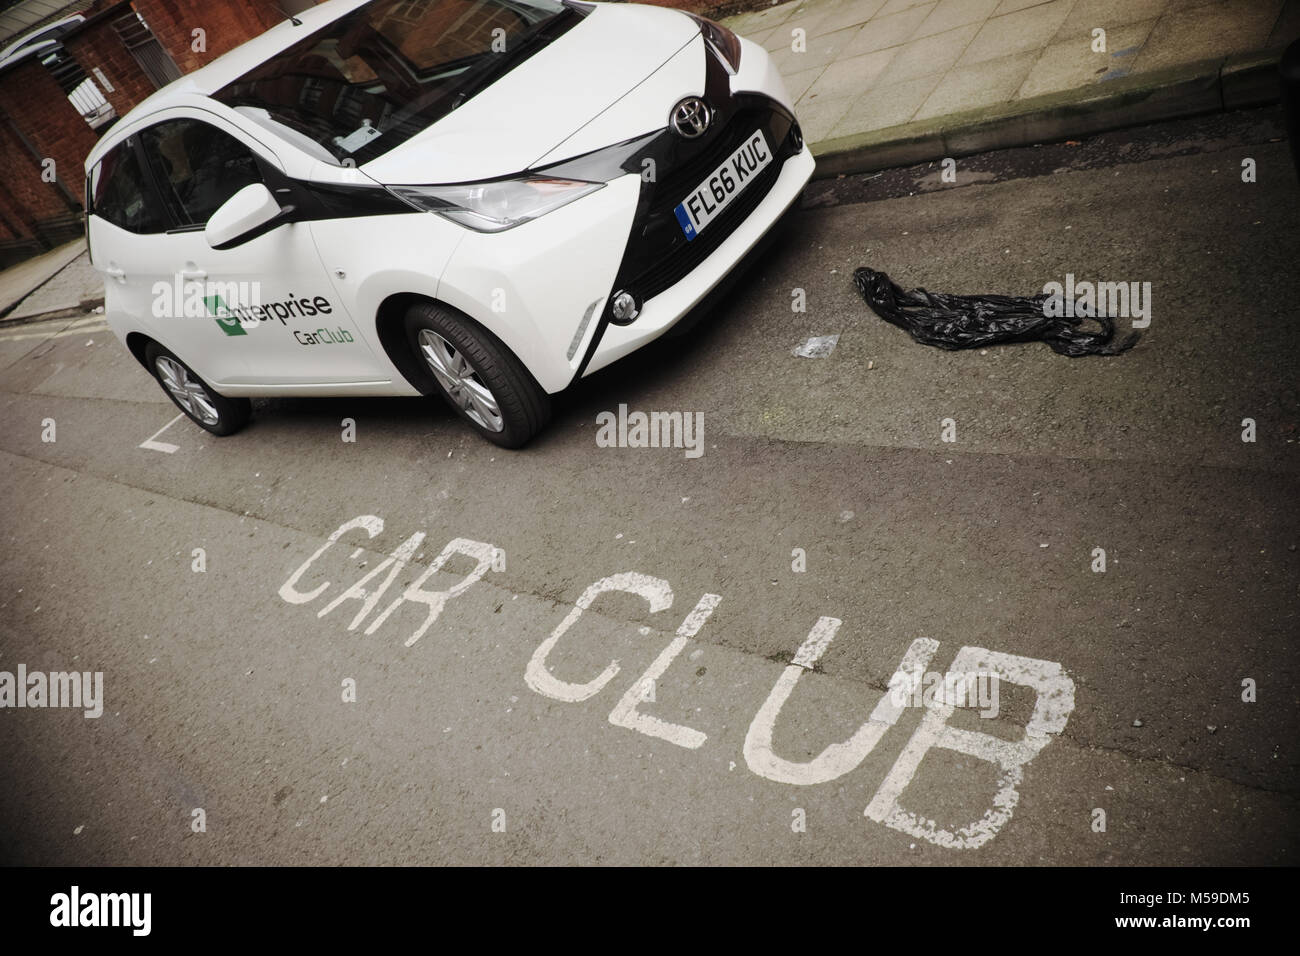 Enterprise Car Club Toyota vehicle parked in a Car Club only parking bay - Birmingham UK Stock Photo